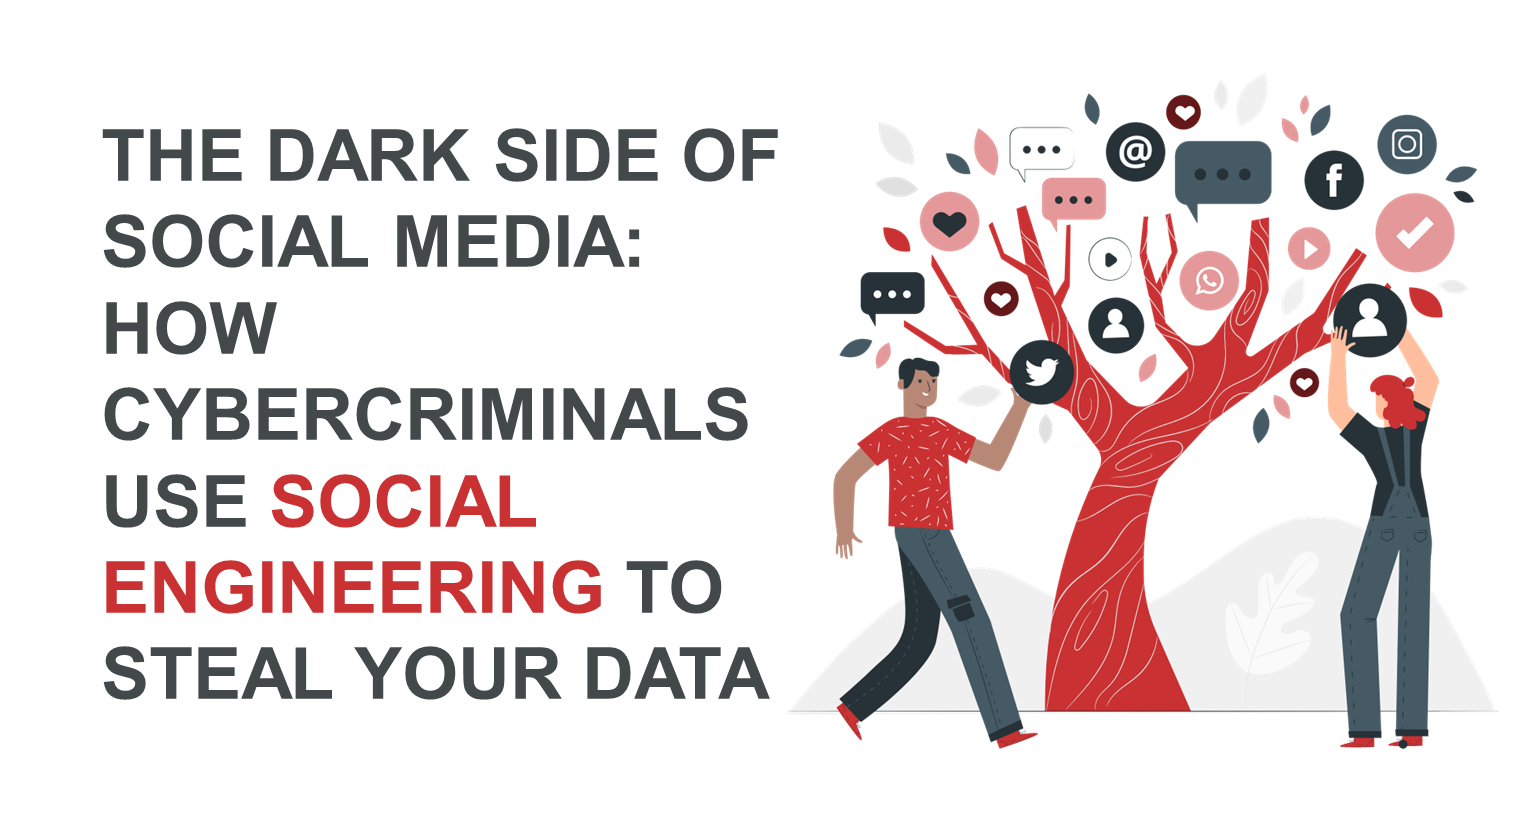 The Dark Side of social media: How Cybercriminals Use Social Engineering to Steal Your Data